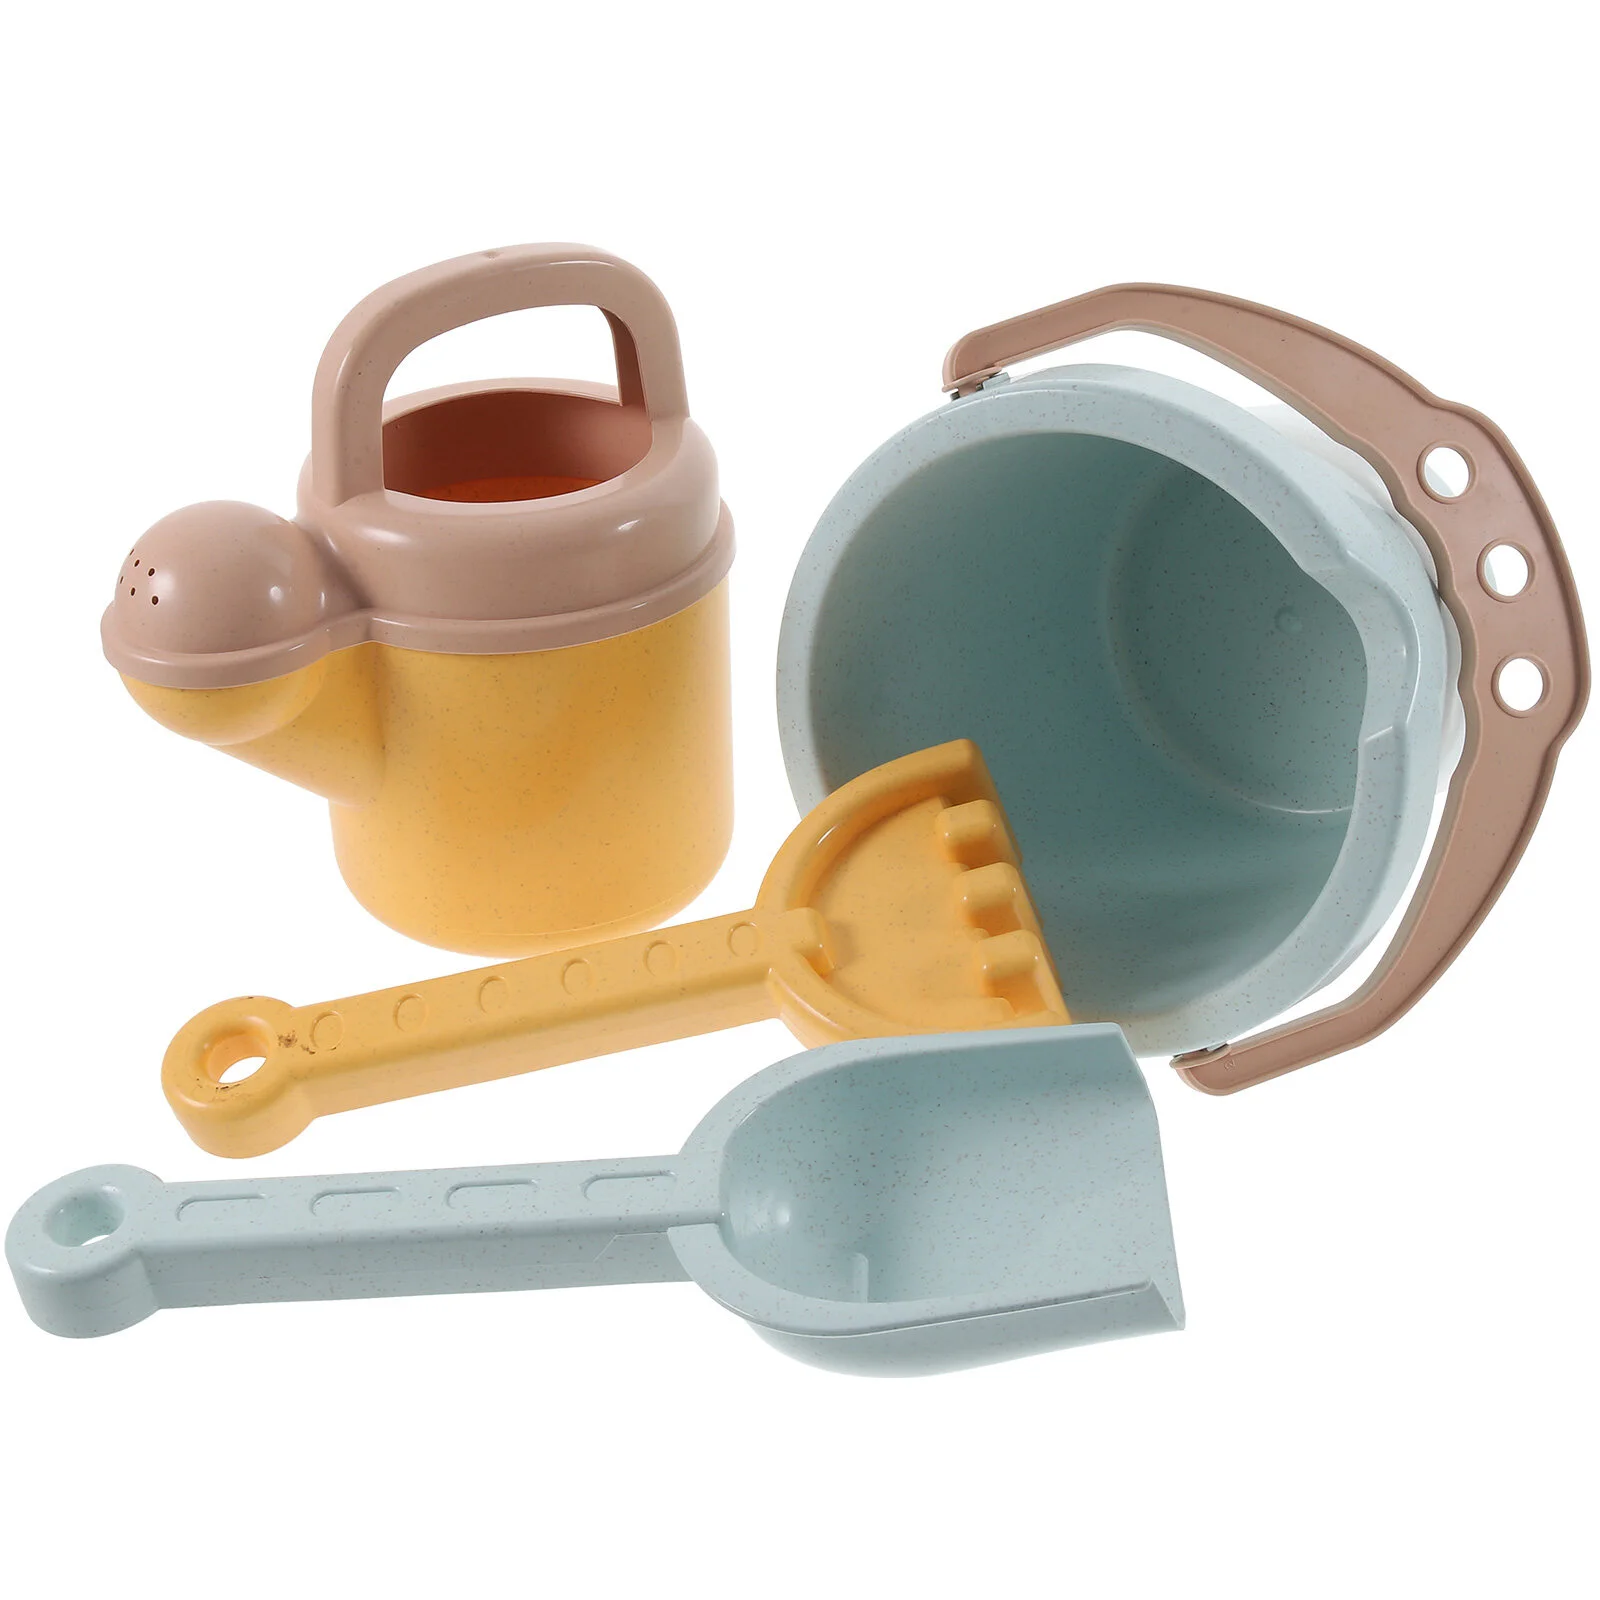 

Gardening Watering Kettles Travel Toys Beach Sand Scoop Cans Outdoor Play Kids The Summer